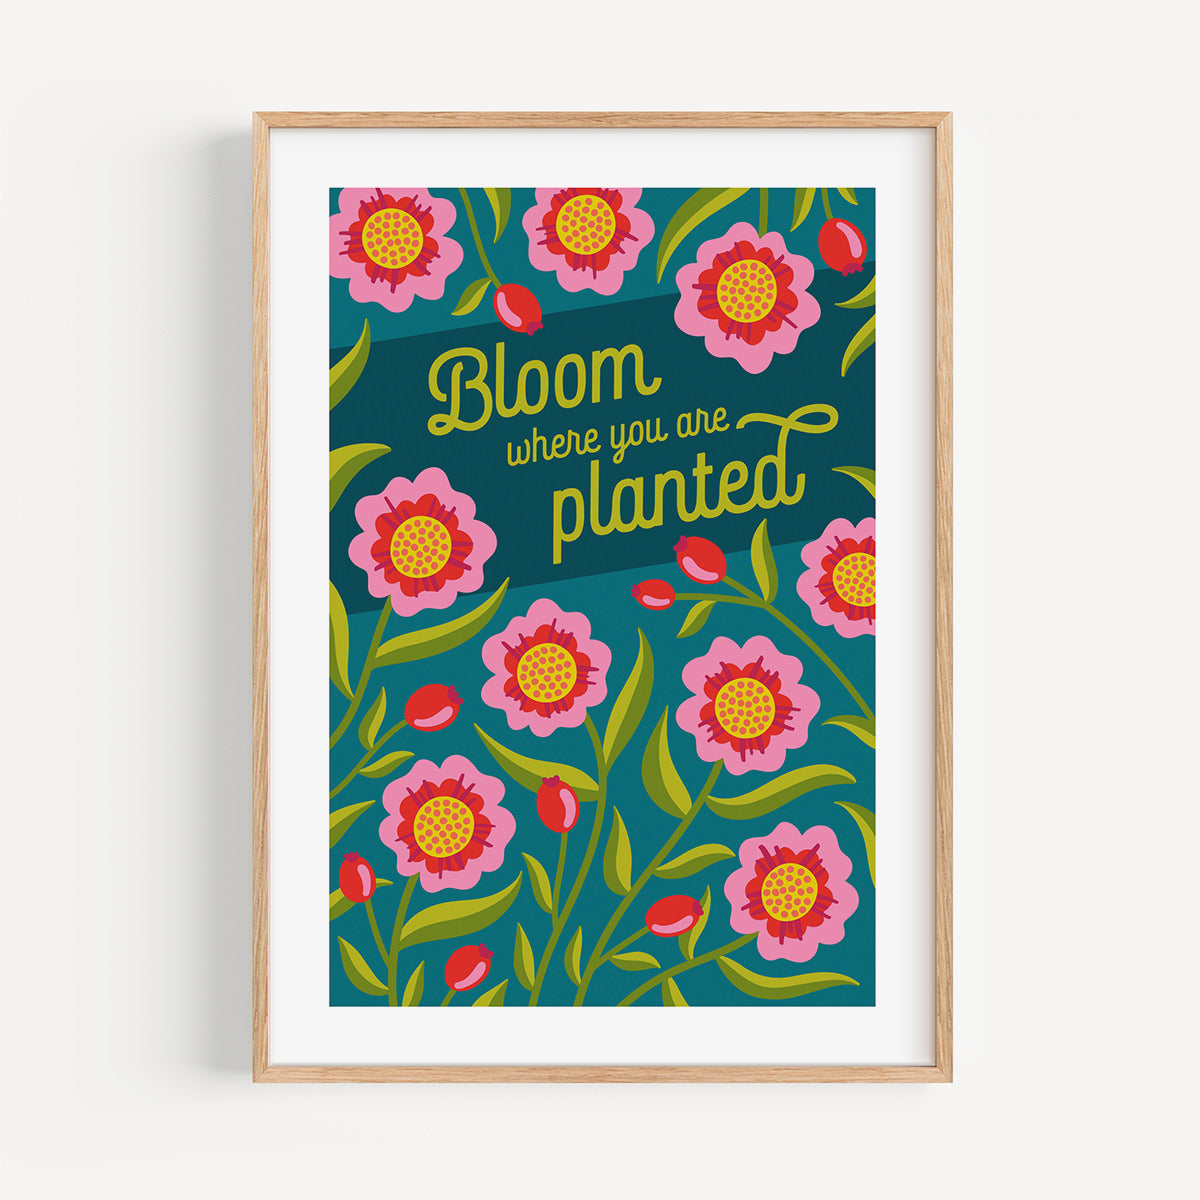 BLOOM WHERE YOU ARE PLANTED - Colourful A4 giclée art print